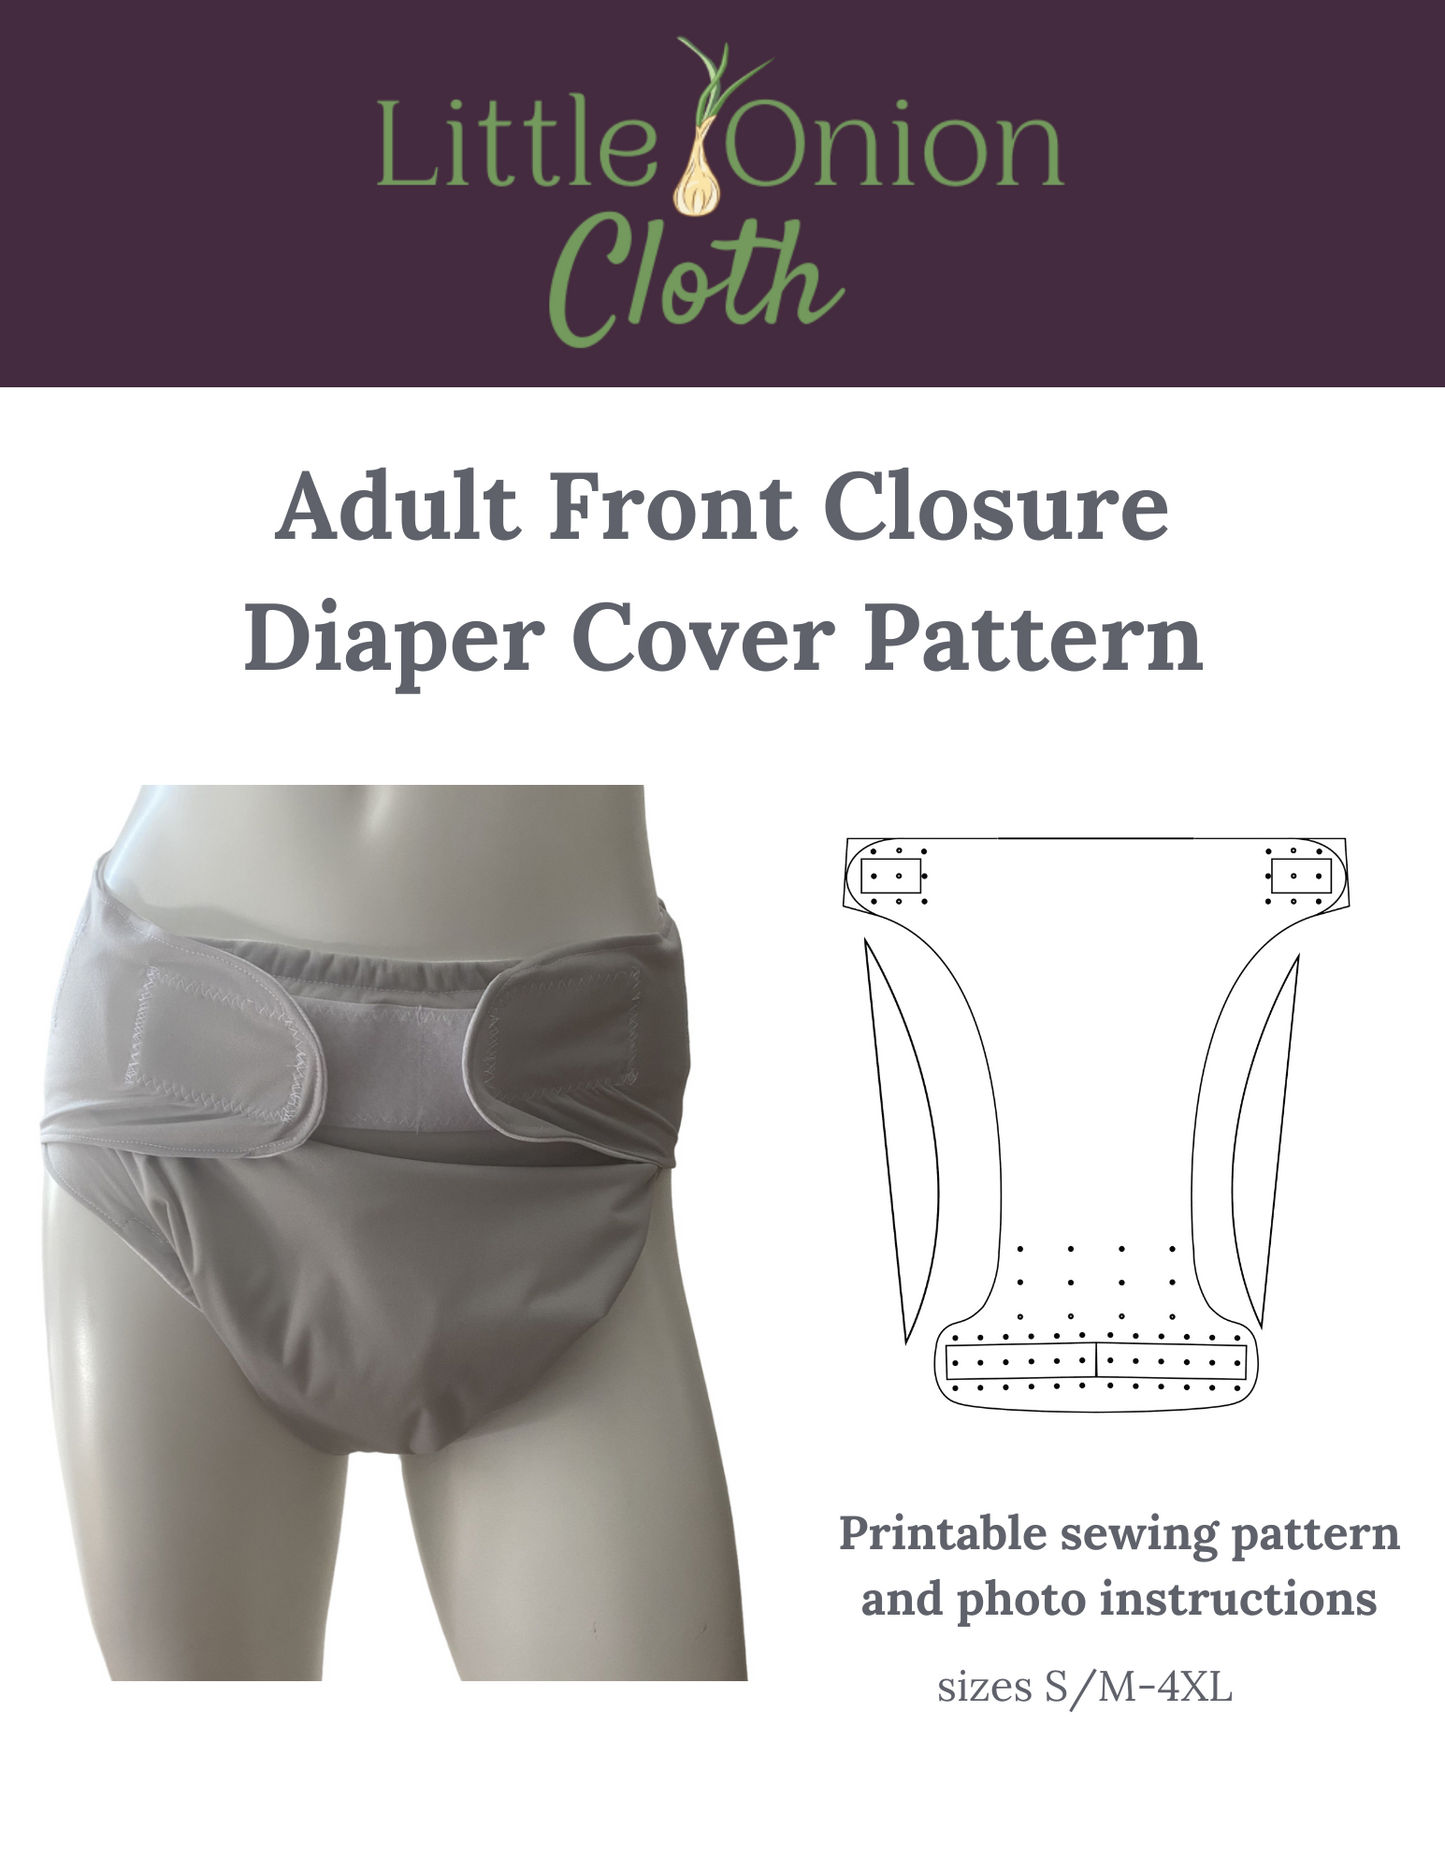 Adult Front Closure Diaper Cover Pattern